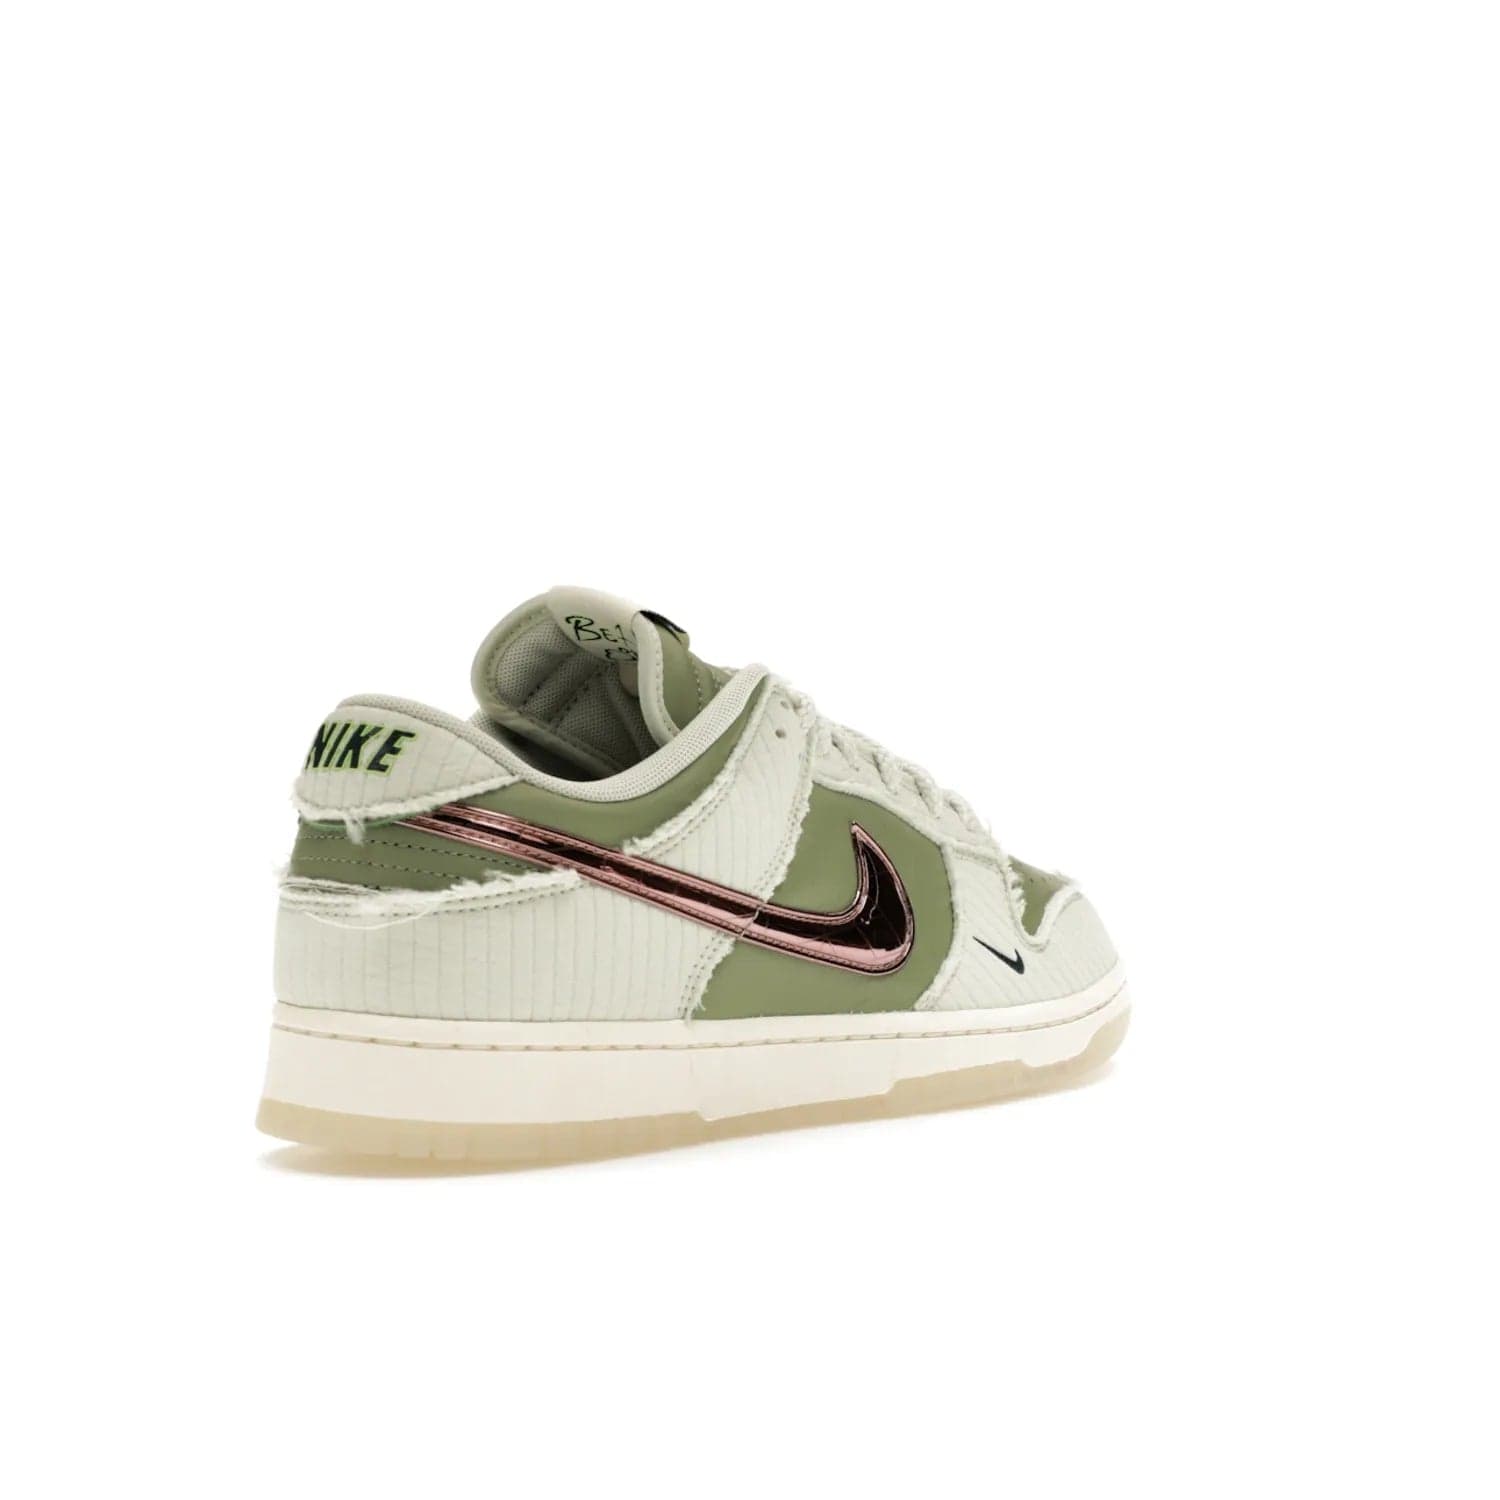 Nike Dunk Low Retro PRM Kyler Murray Be 1 of One - Image 32 - Only at www.BallersClubKickz.com - Introducing the Nike Dunk Low Retro PRM Kyler Murray "Be 1 of One"! A Sea Glass upper with Sail and Oil Green accents, finished with Rose Gold accents. Drop date: November 10th.